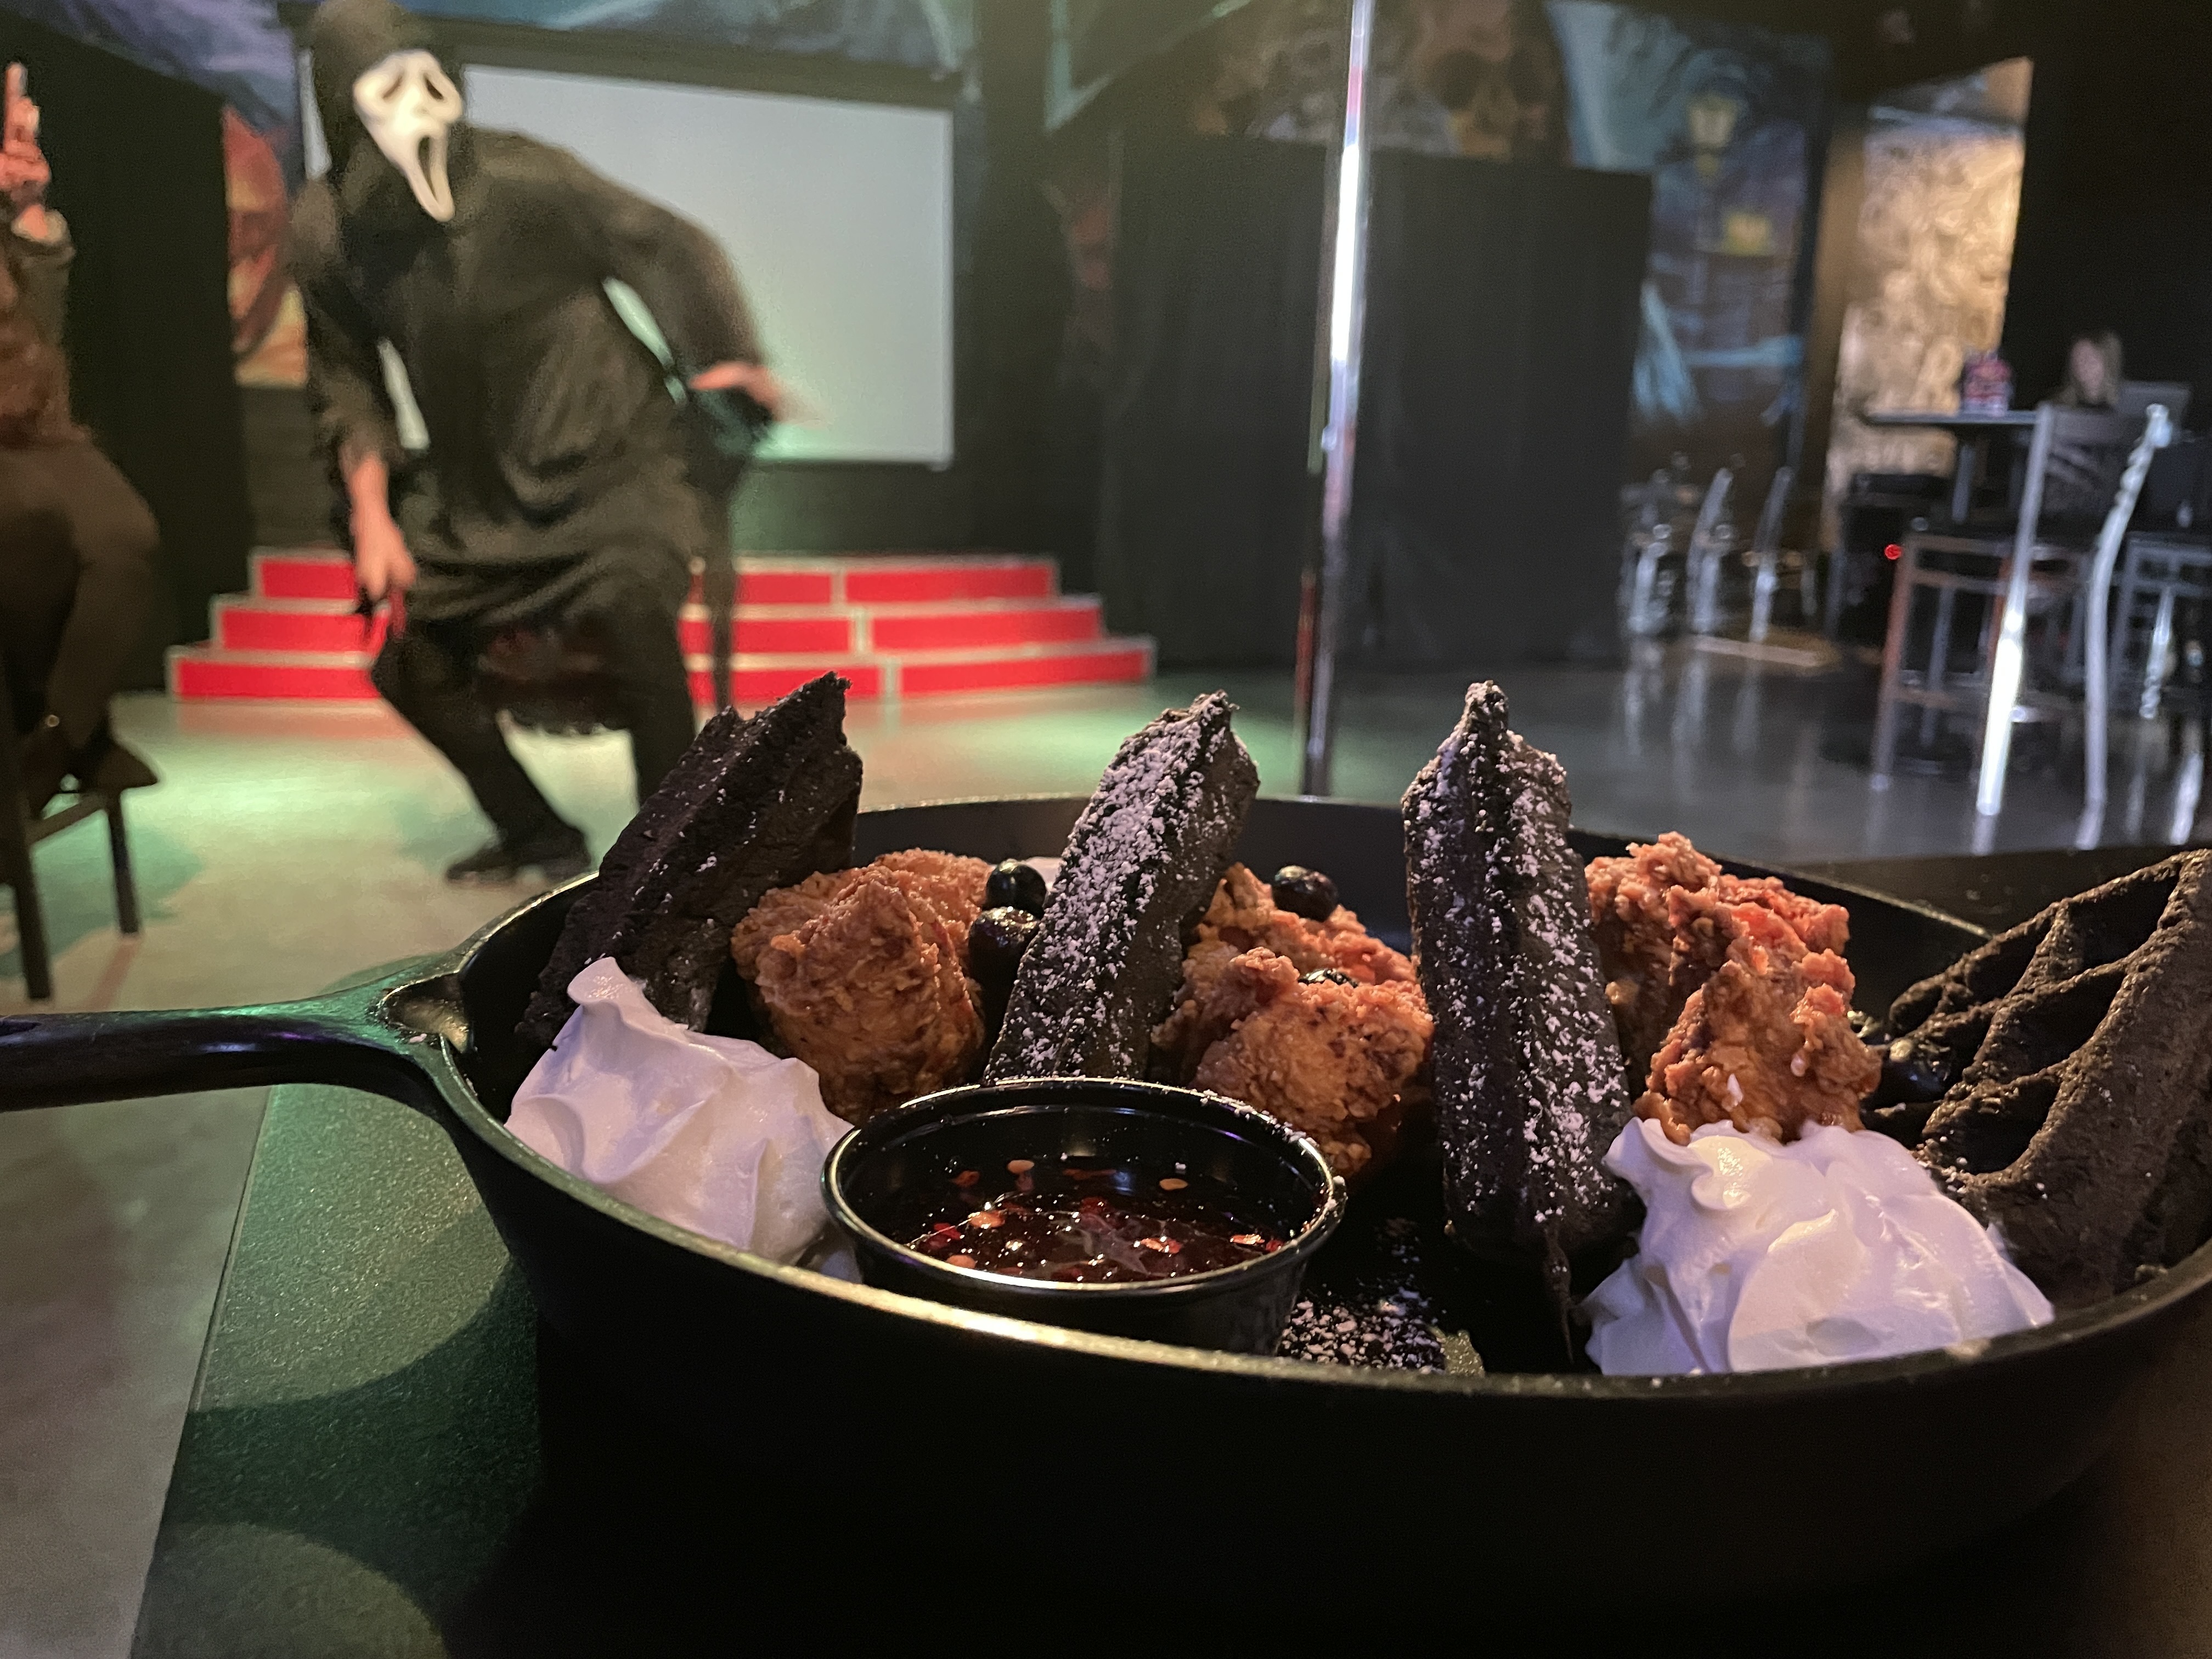 A hooded figure performs behind a plate of chicken and waffles.